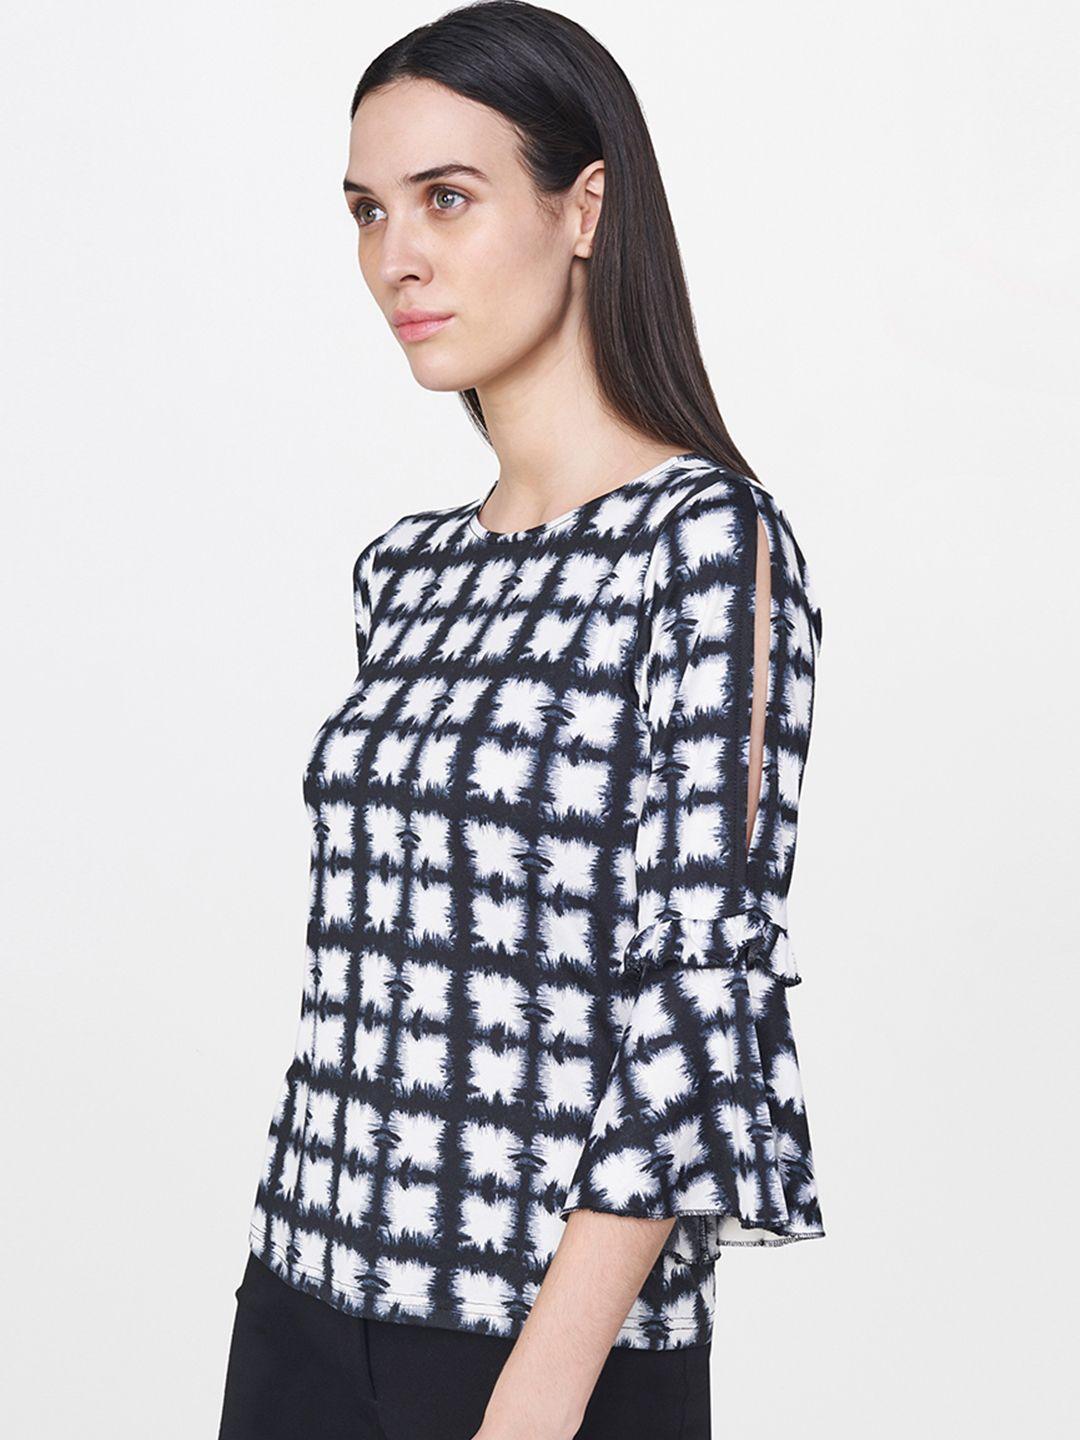 and women black & white printed top